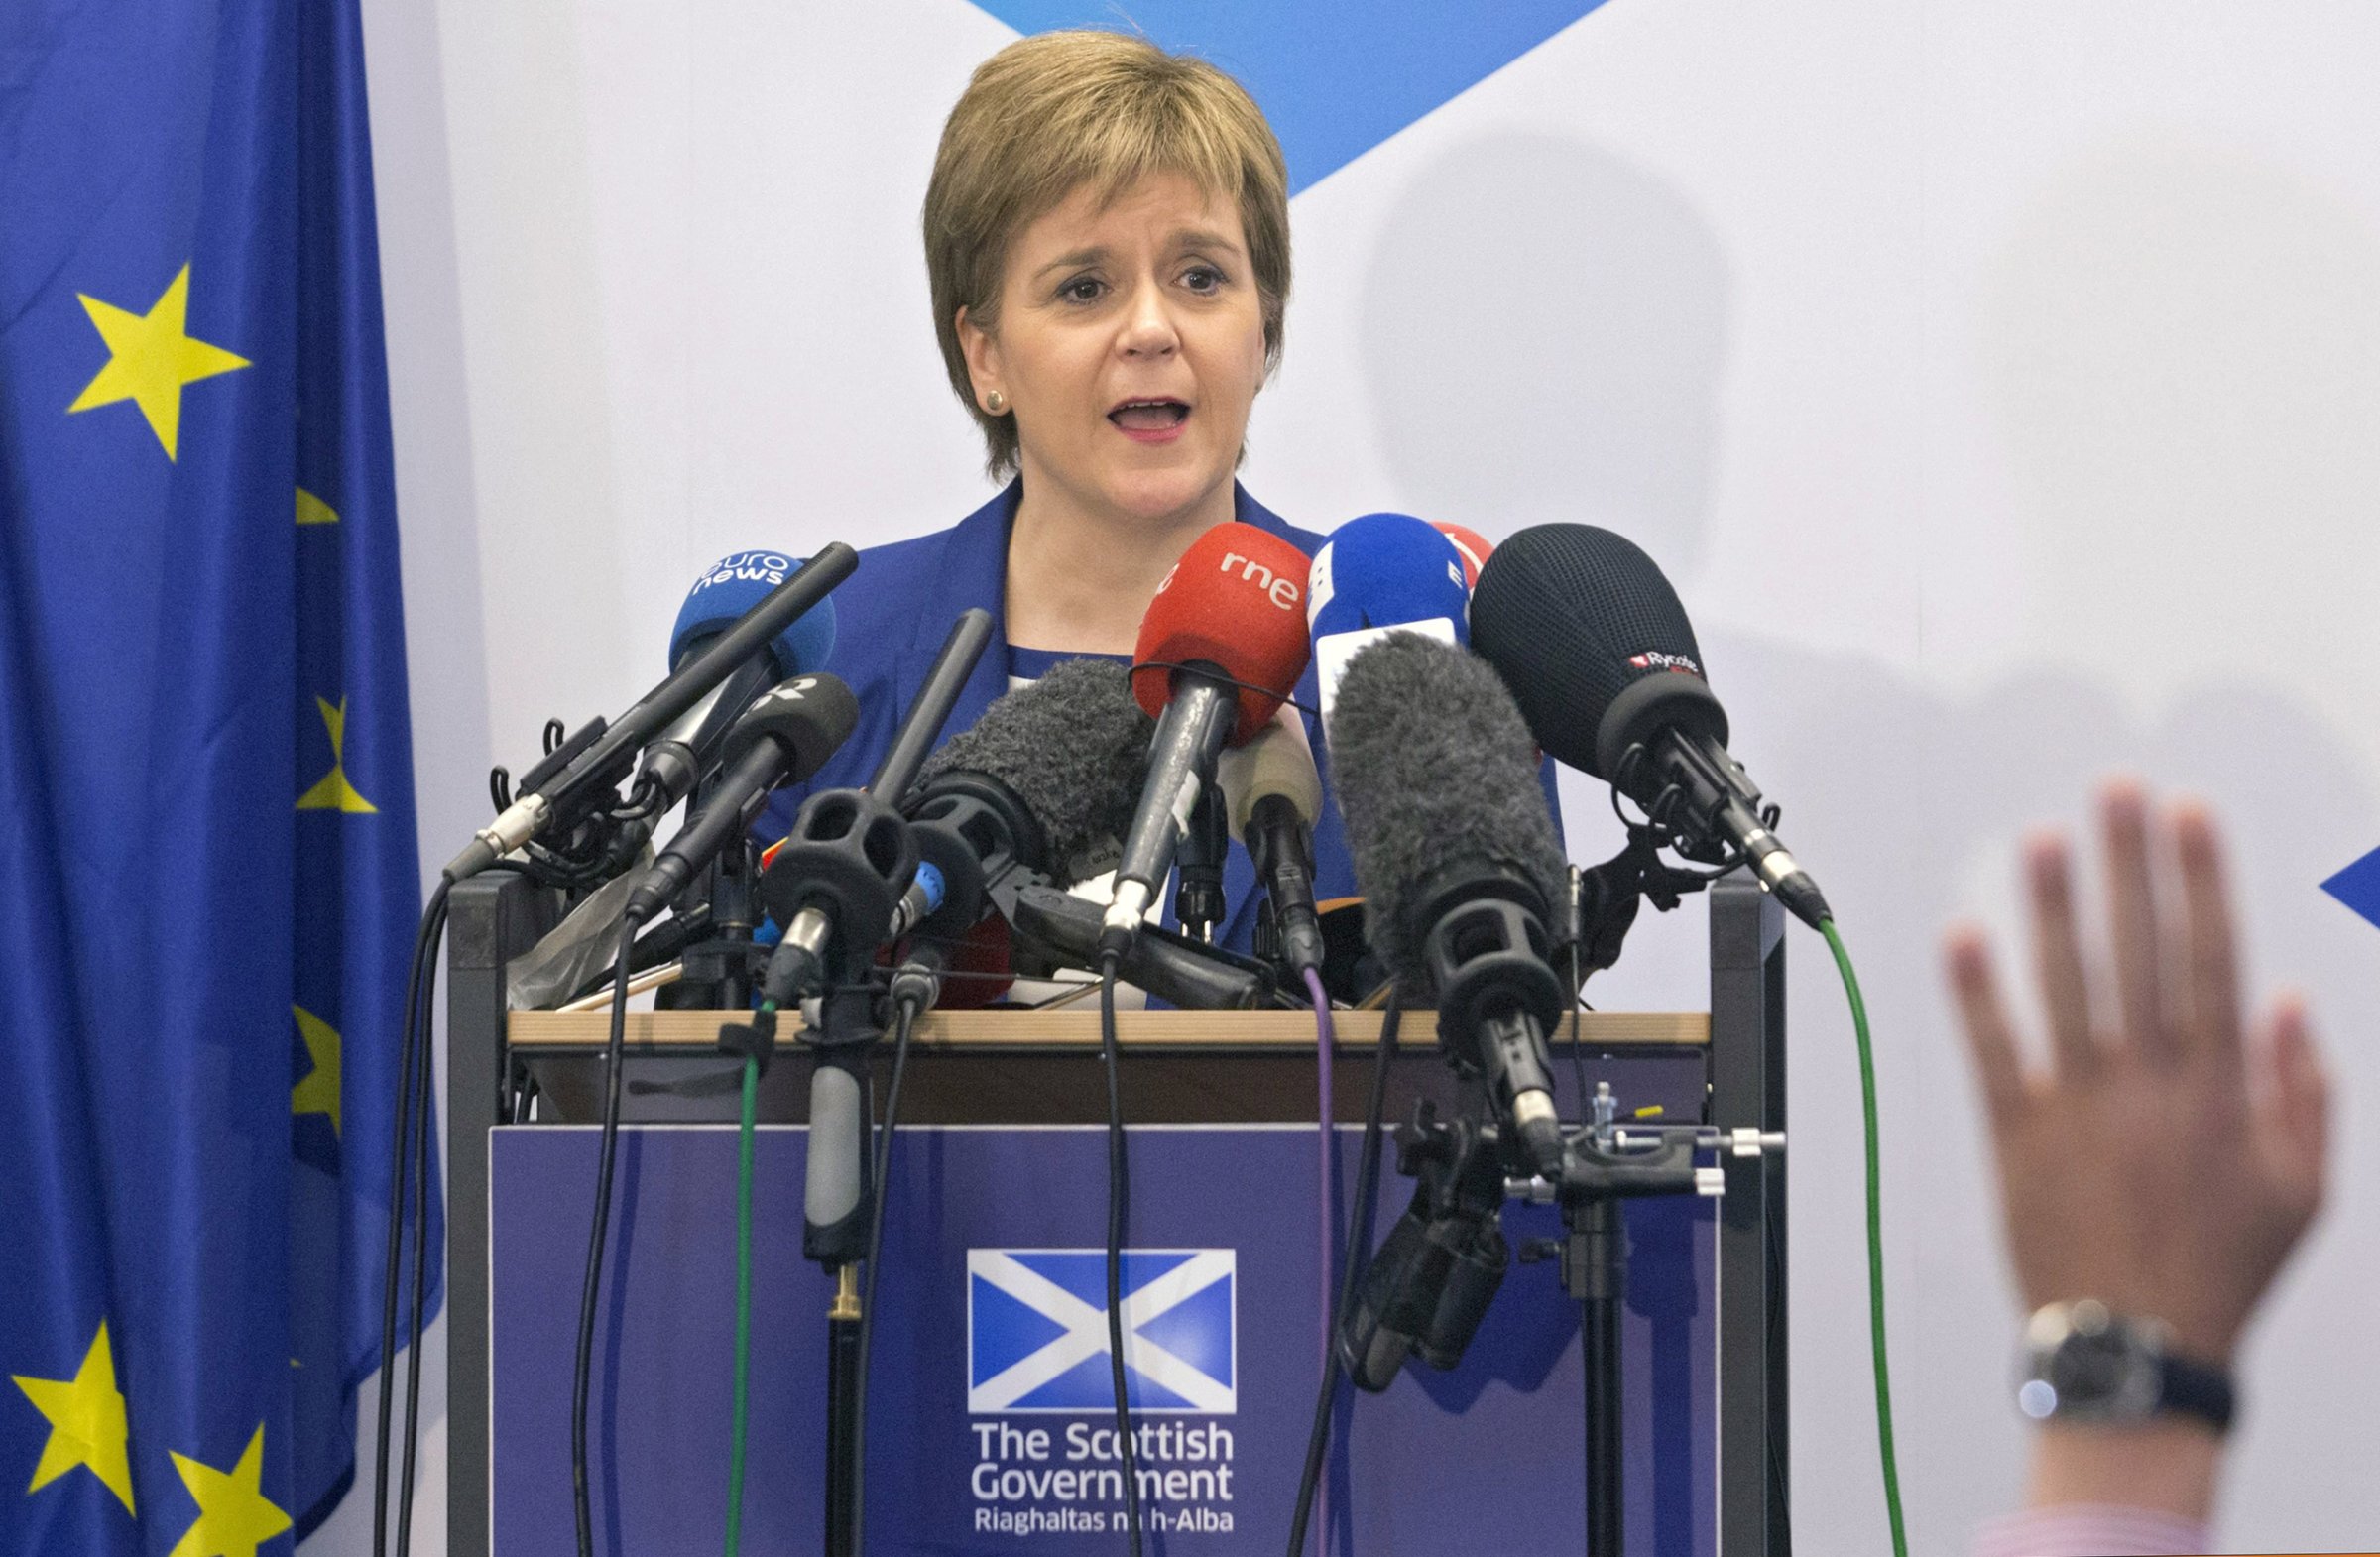 Scotland's First Minister Nicola Sturgeon holds a news conference at the Scotland House on her visit in Brussels, Belgium, June 29, 2016.